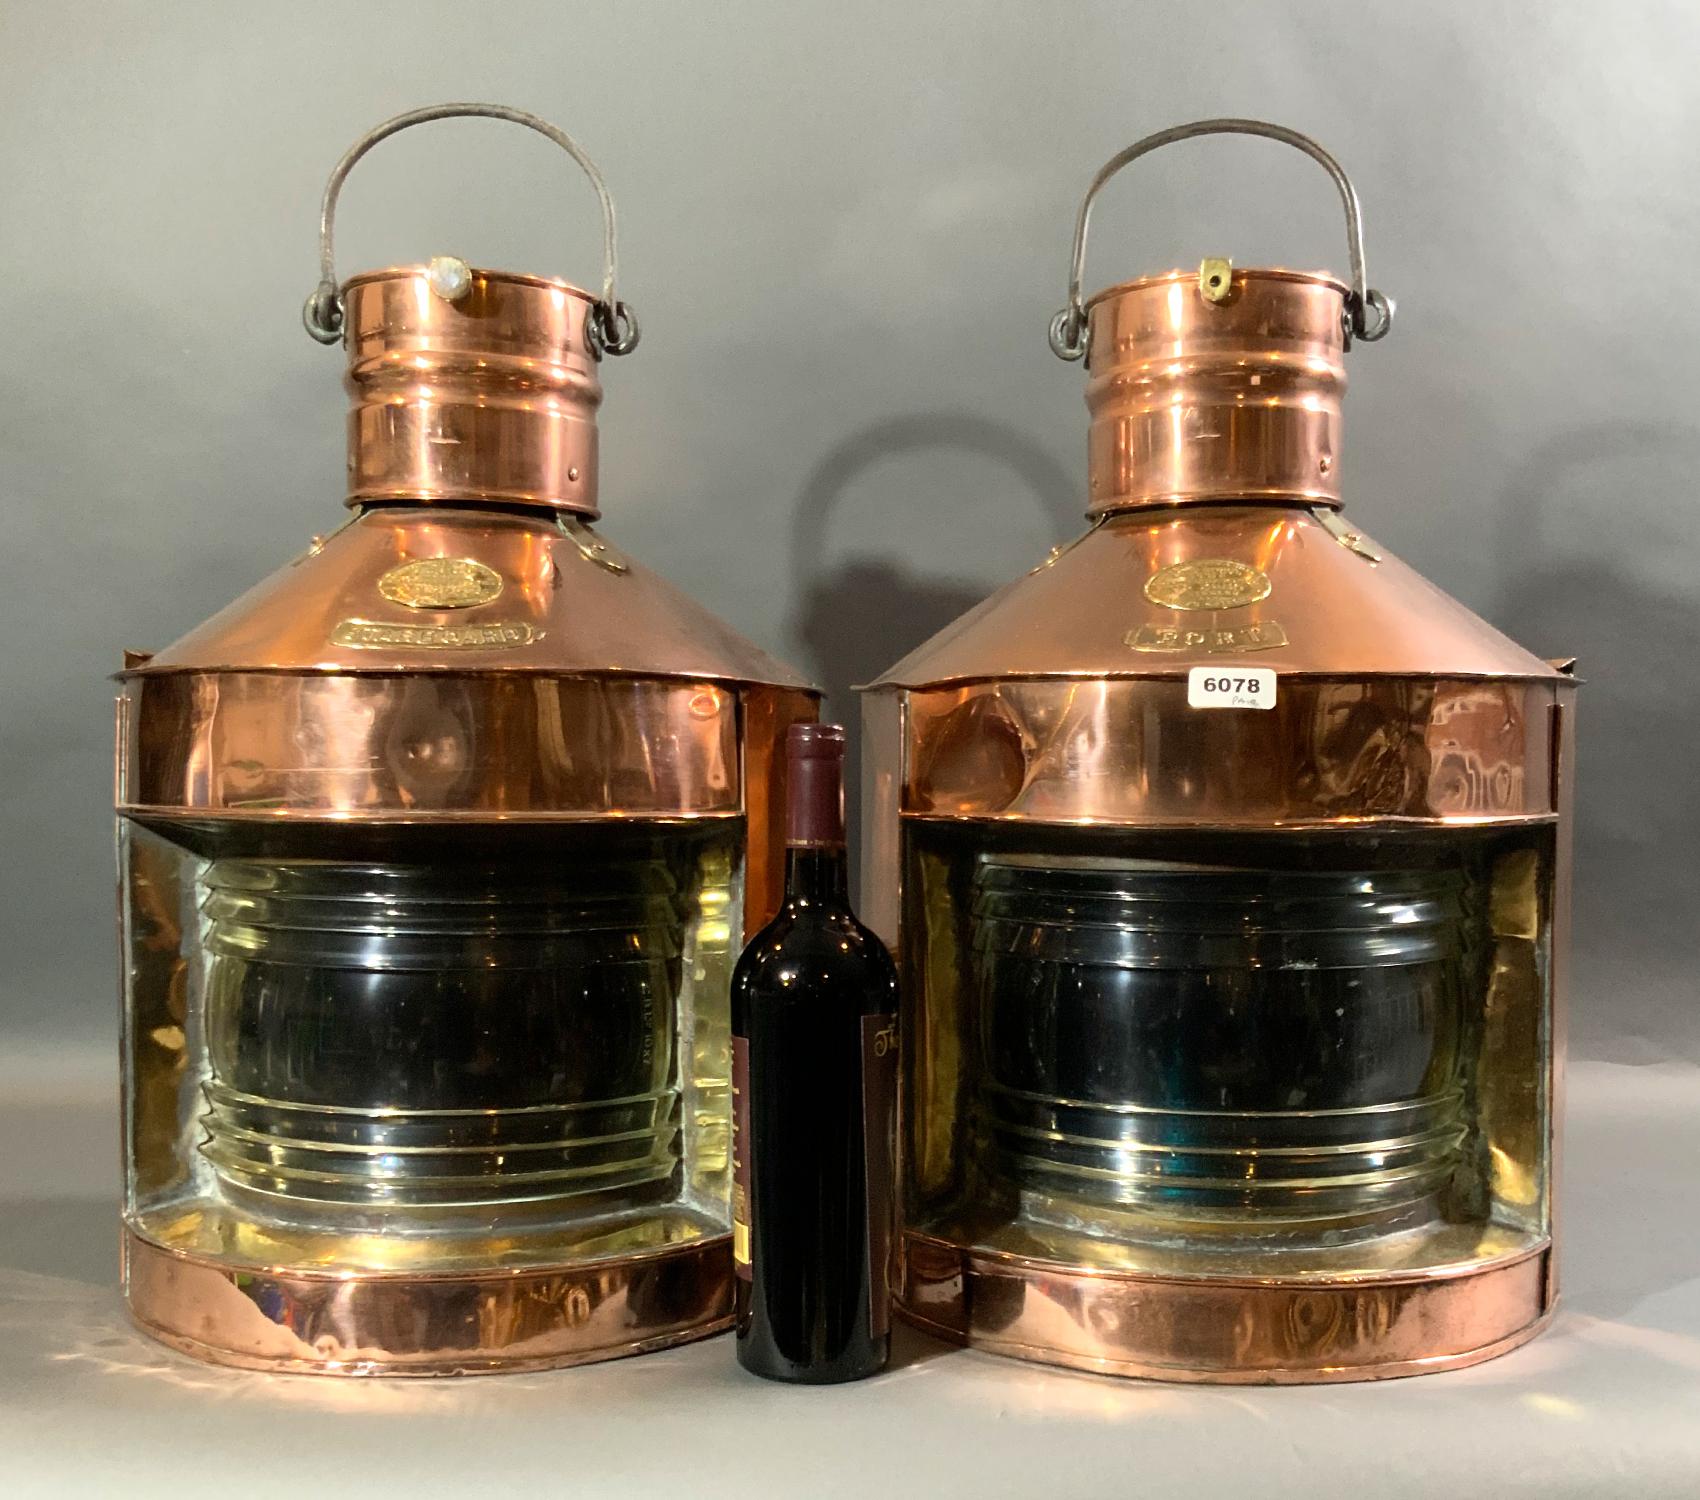 Fine massive pair of Scottish port and starboard ship’s lanterns of solid copper with brass trim. The glass Fresnel lenses have some chips and flakes from years of use. Brass badges read Richard Irvin and Sons LTD., ship store merchants and lamp